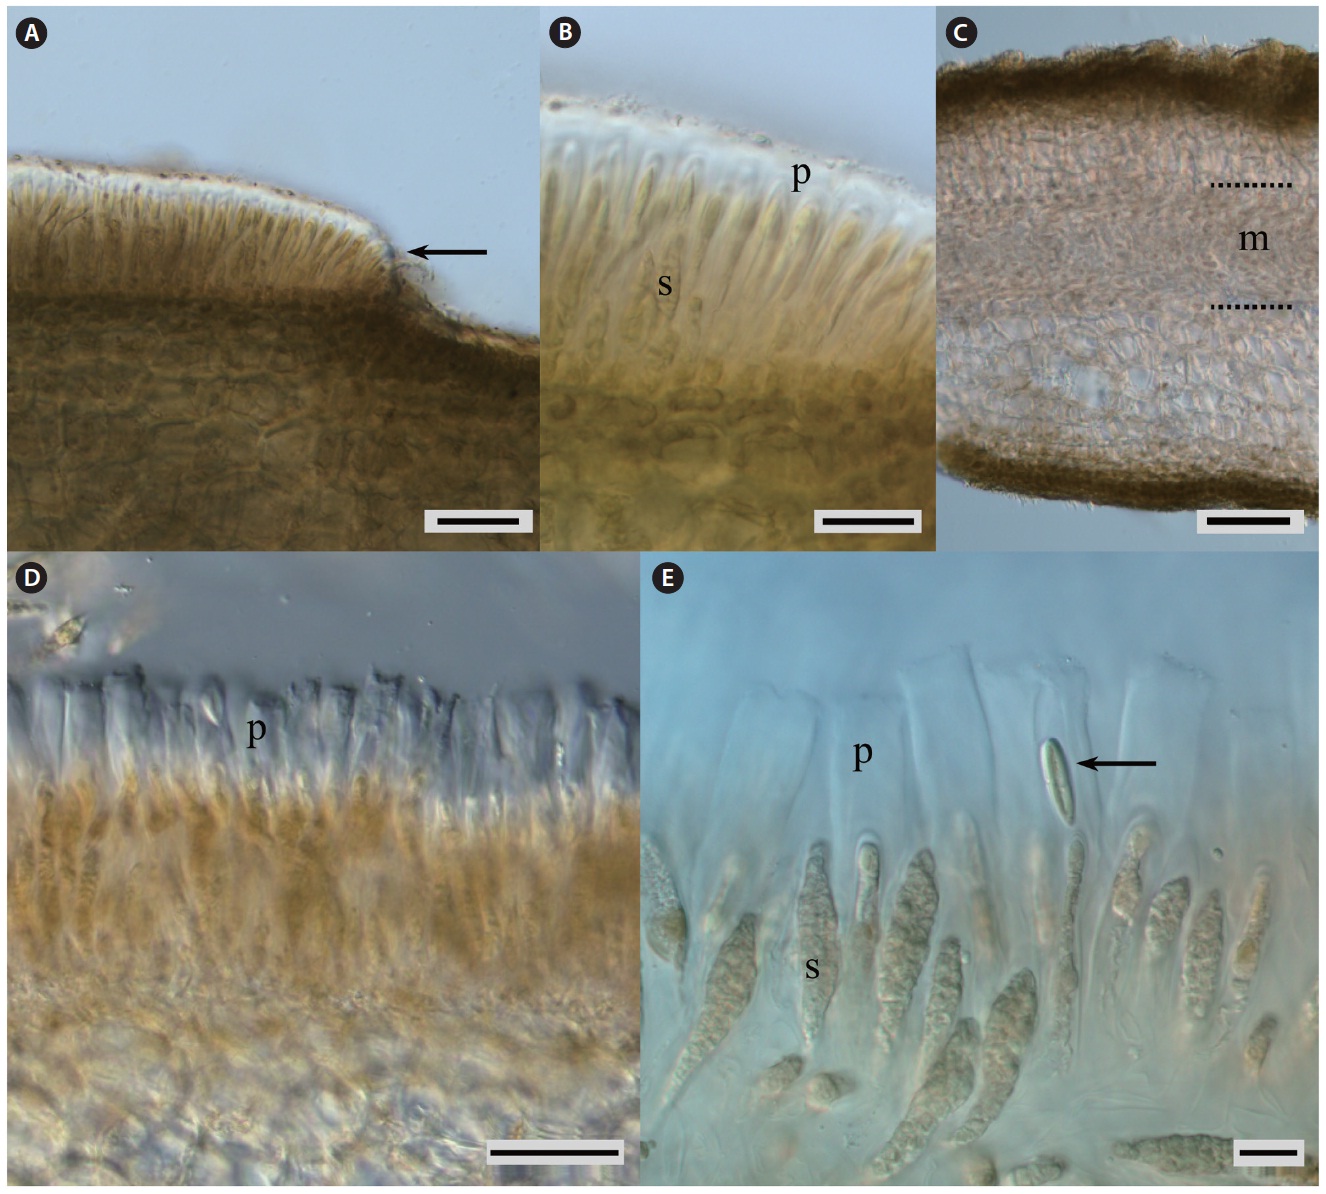 Cross-sections of fertile blades of Laminaria appressirhiza (A-C) and L. inclinatorhiza (D & E). Paraphyses of L. inclinatorhiza (D & E) have longer gelatinous caps than in L. appressirhiza (A & B). (A) Arrow points to a zone in the cortical layer where sporangia and paraphyses begin to develop. (C) Part of fertile blade of L. appressirhiza with thick medullar layer (dashed lines, m). (E) Arrow points to a diatom cell, which is inside the long gelatinous cap. p, paraphyses; s, sporangia. Scale bars represent: A, B & D, 30 μm; C, 100 μm; E, 15 μm.